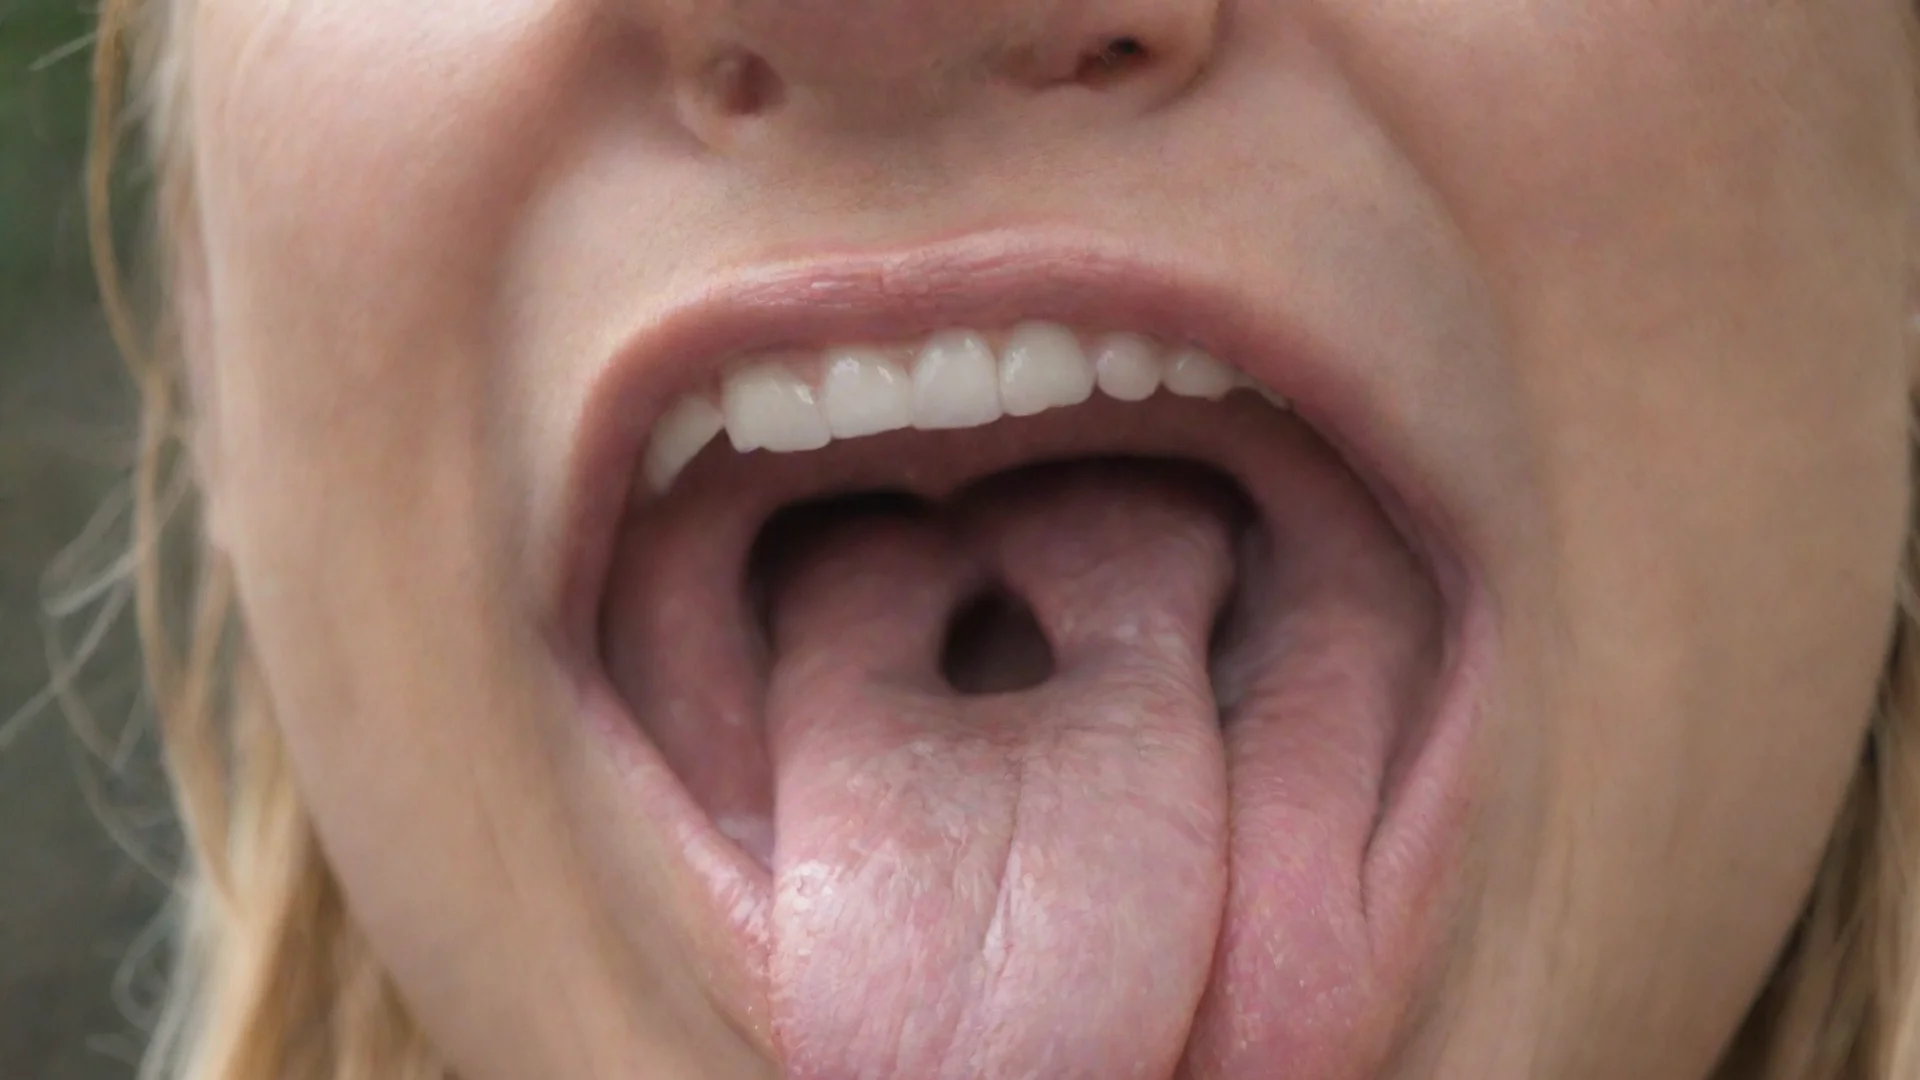 aiamazing overly long tongue awesome portrait 2 wide